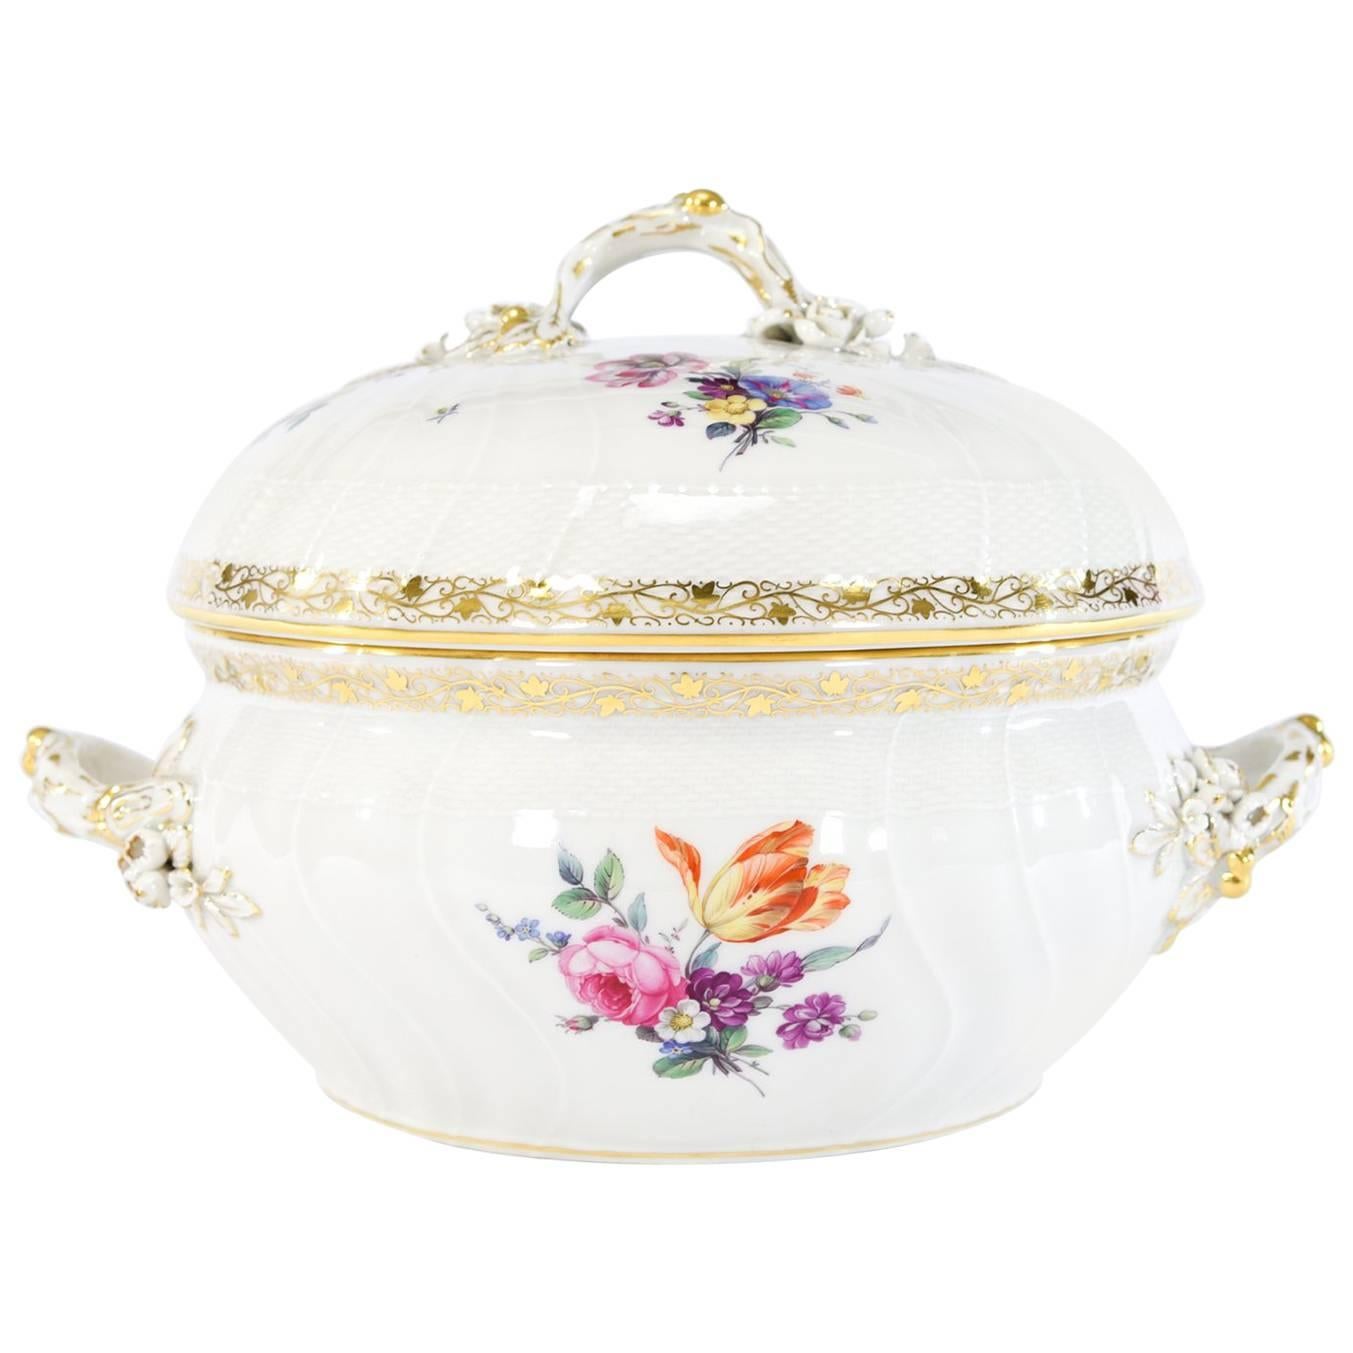 KPM White & Gold Round Tureen with Hand Painted Floral Decoration Molded Relief For Sale